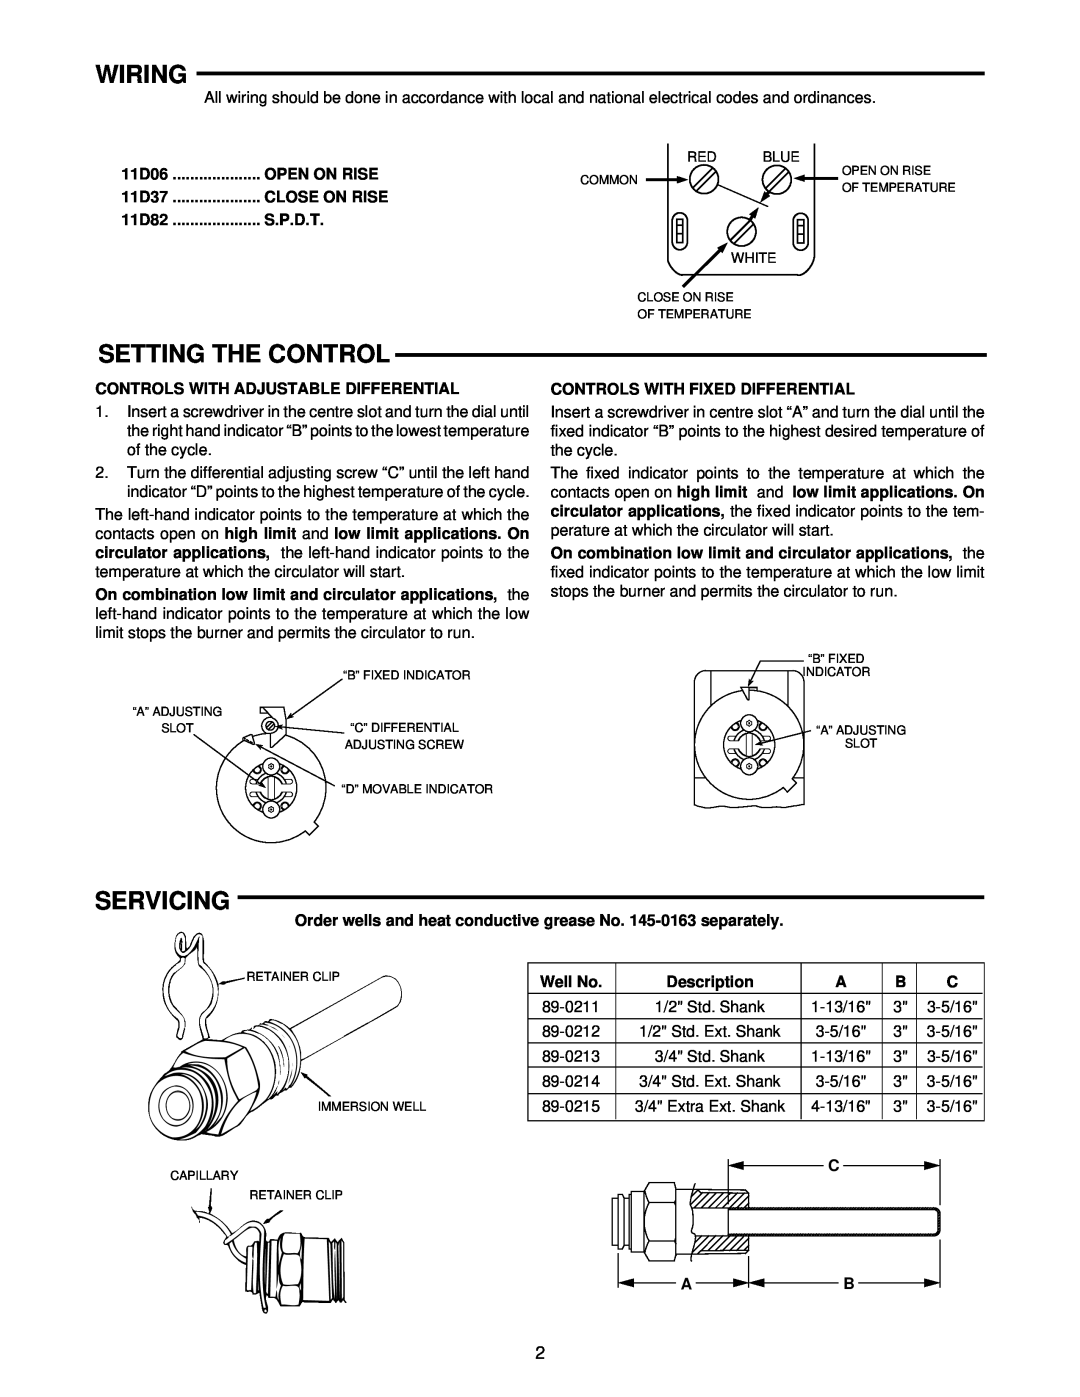 White Rodgers 11D37, 11D82, 11D06 installation instructions Wiring, Setting The Control, Servicing 